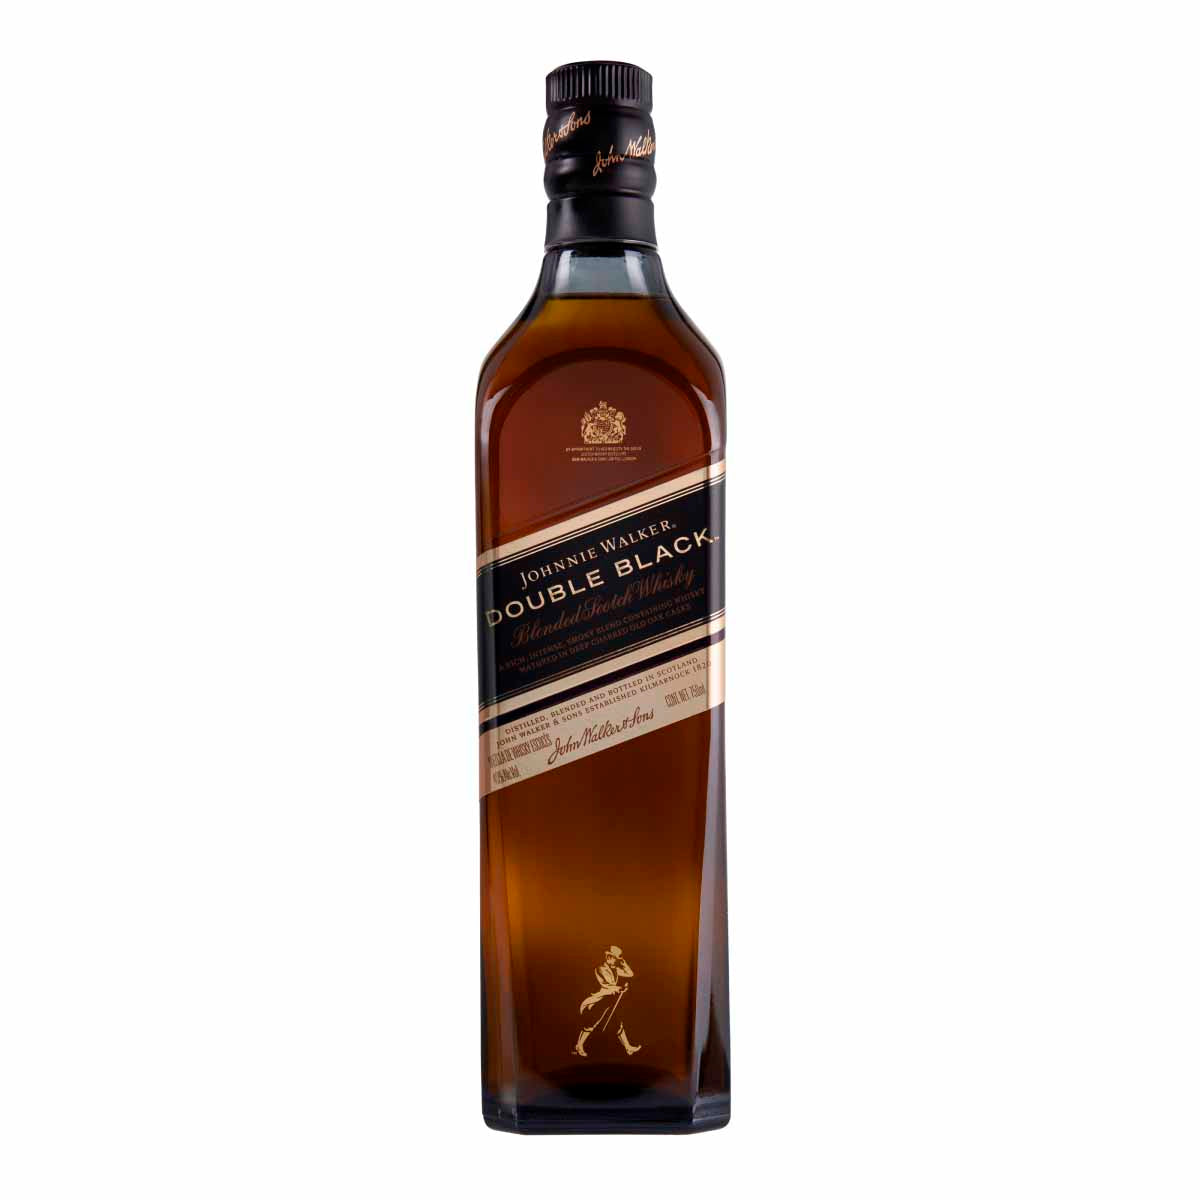 Whisky Johnnie Walker Double Black Blended Scotch 750 ml